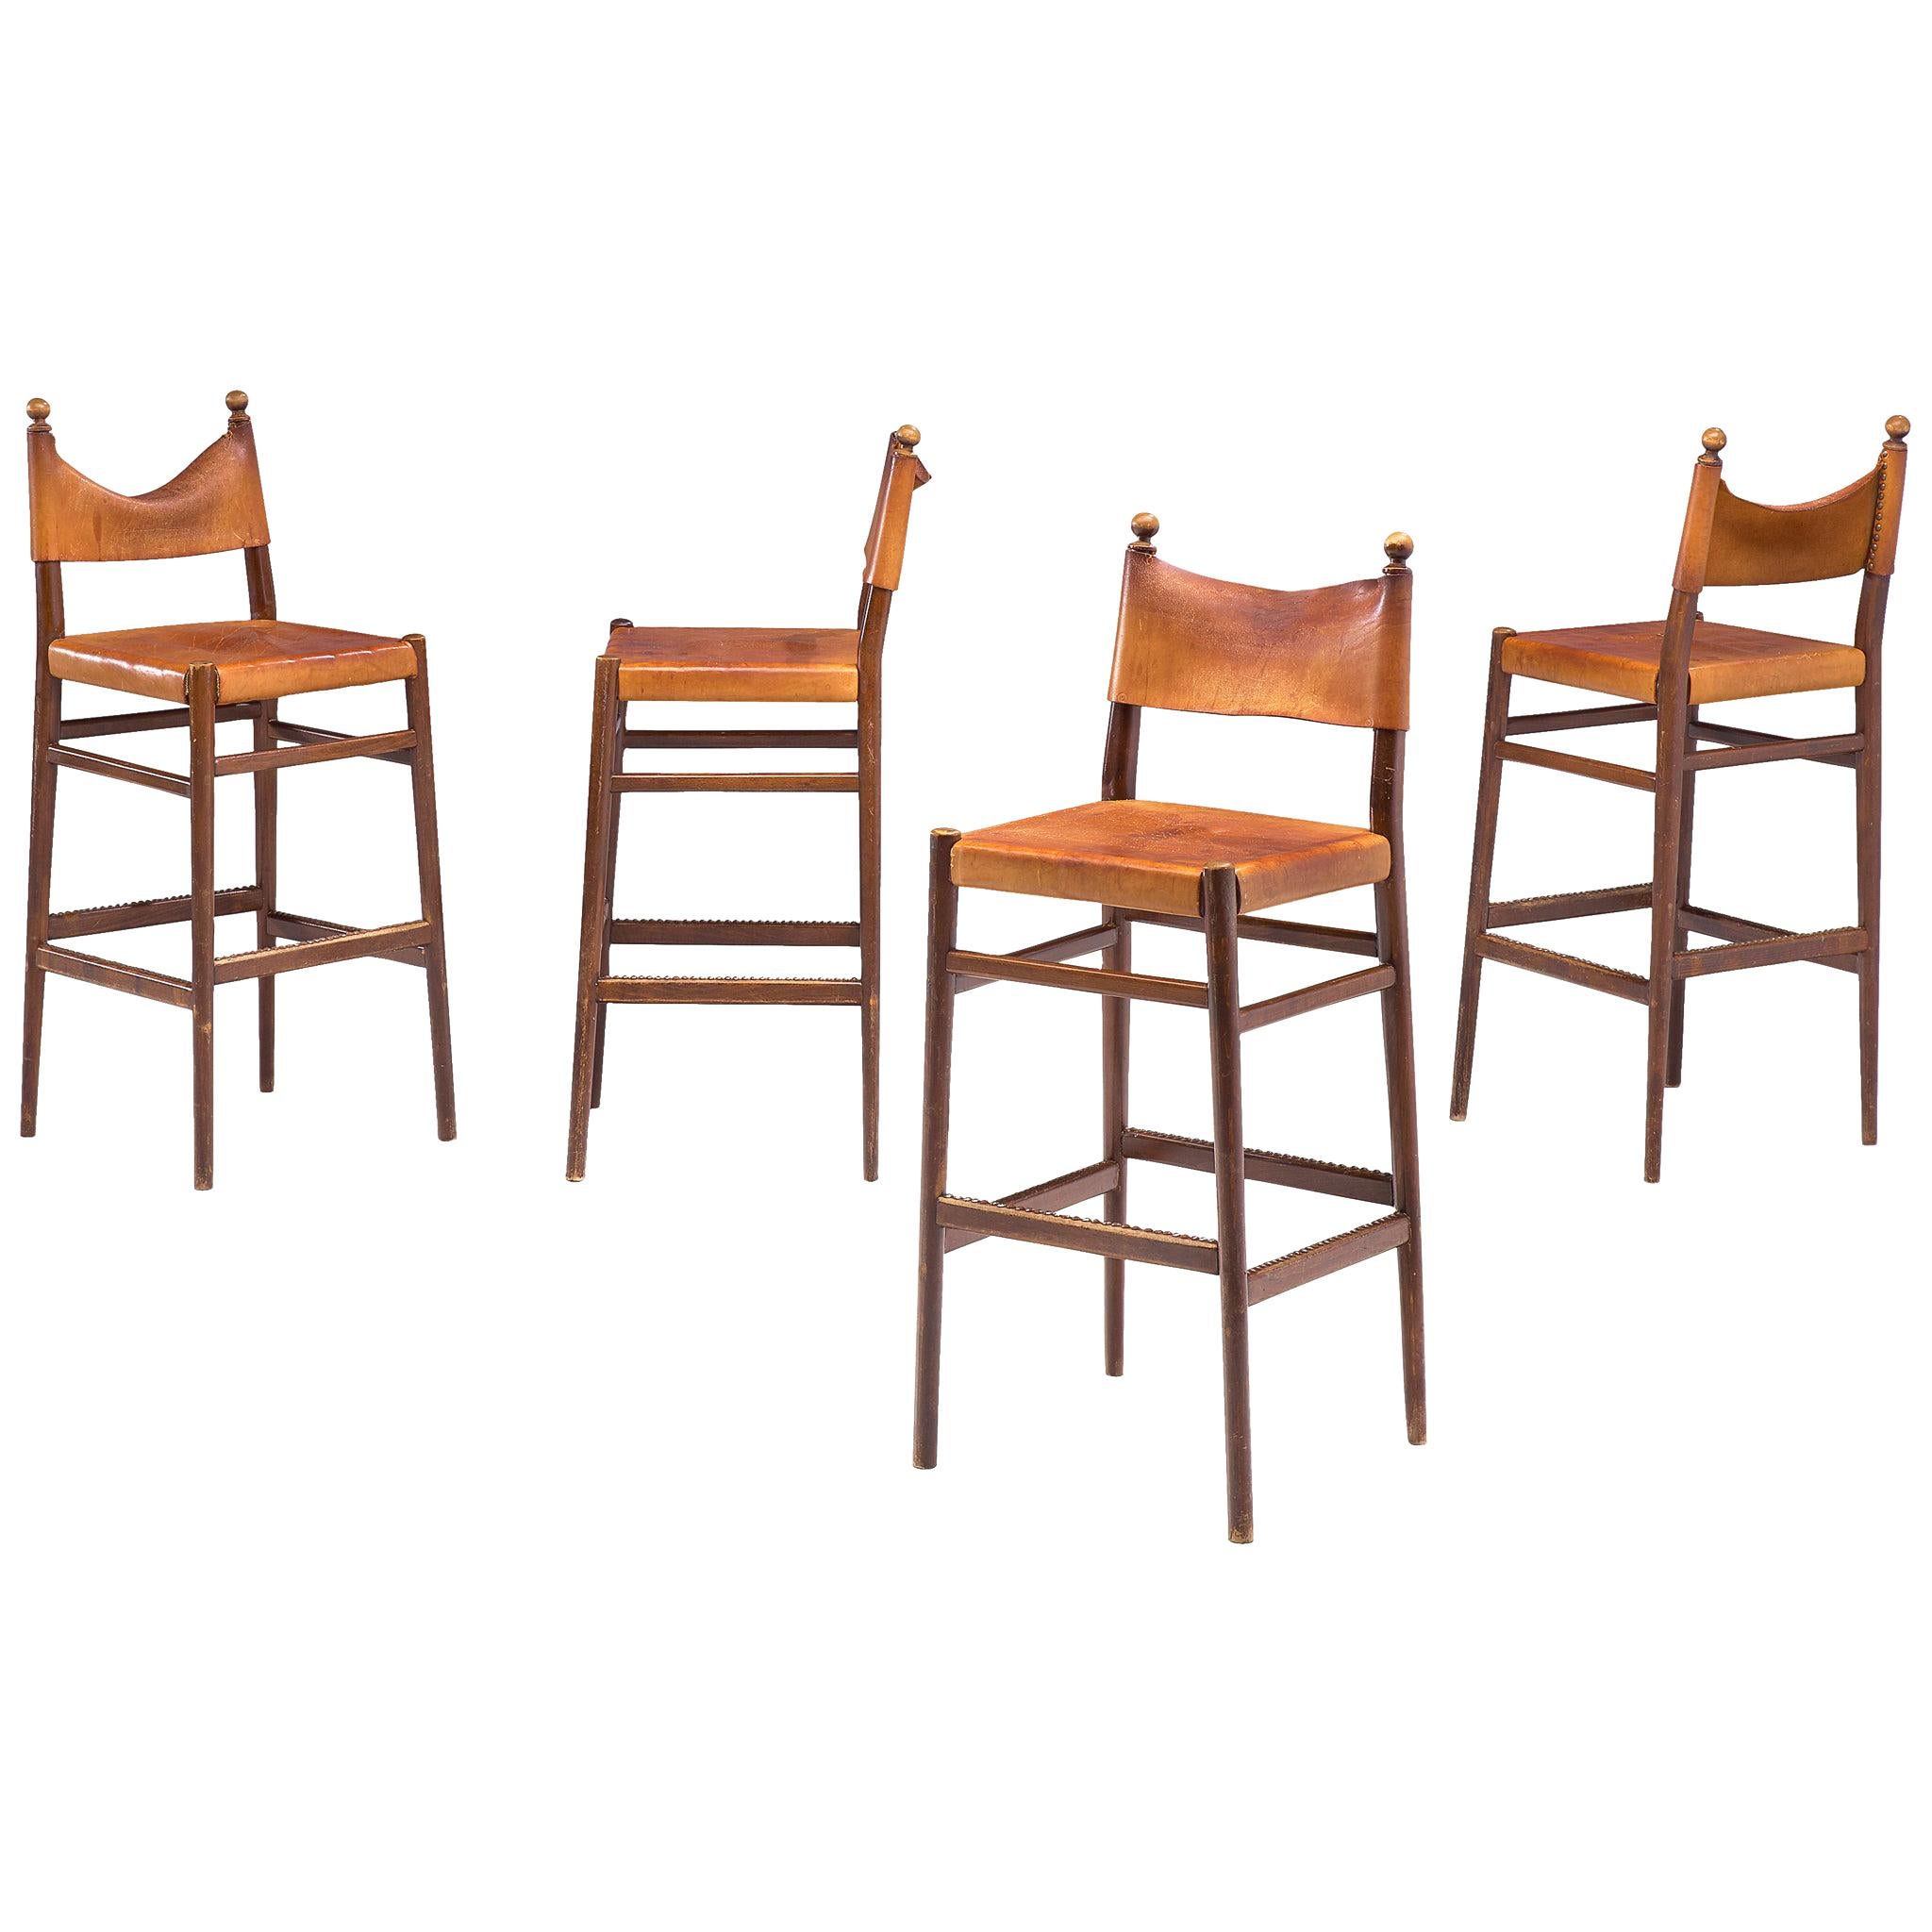 Set of Four Scandinavian Barstools in Patinated Cognac Leather